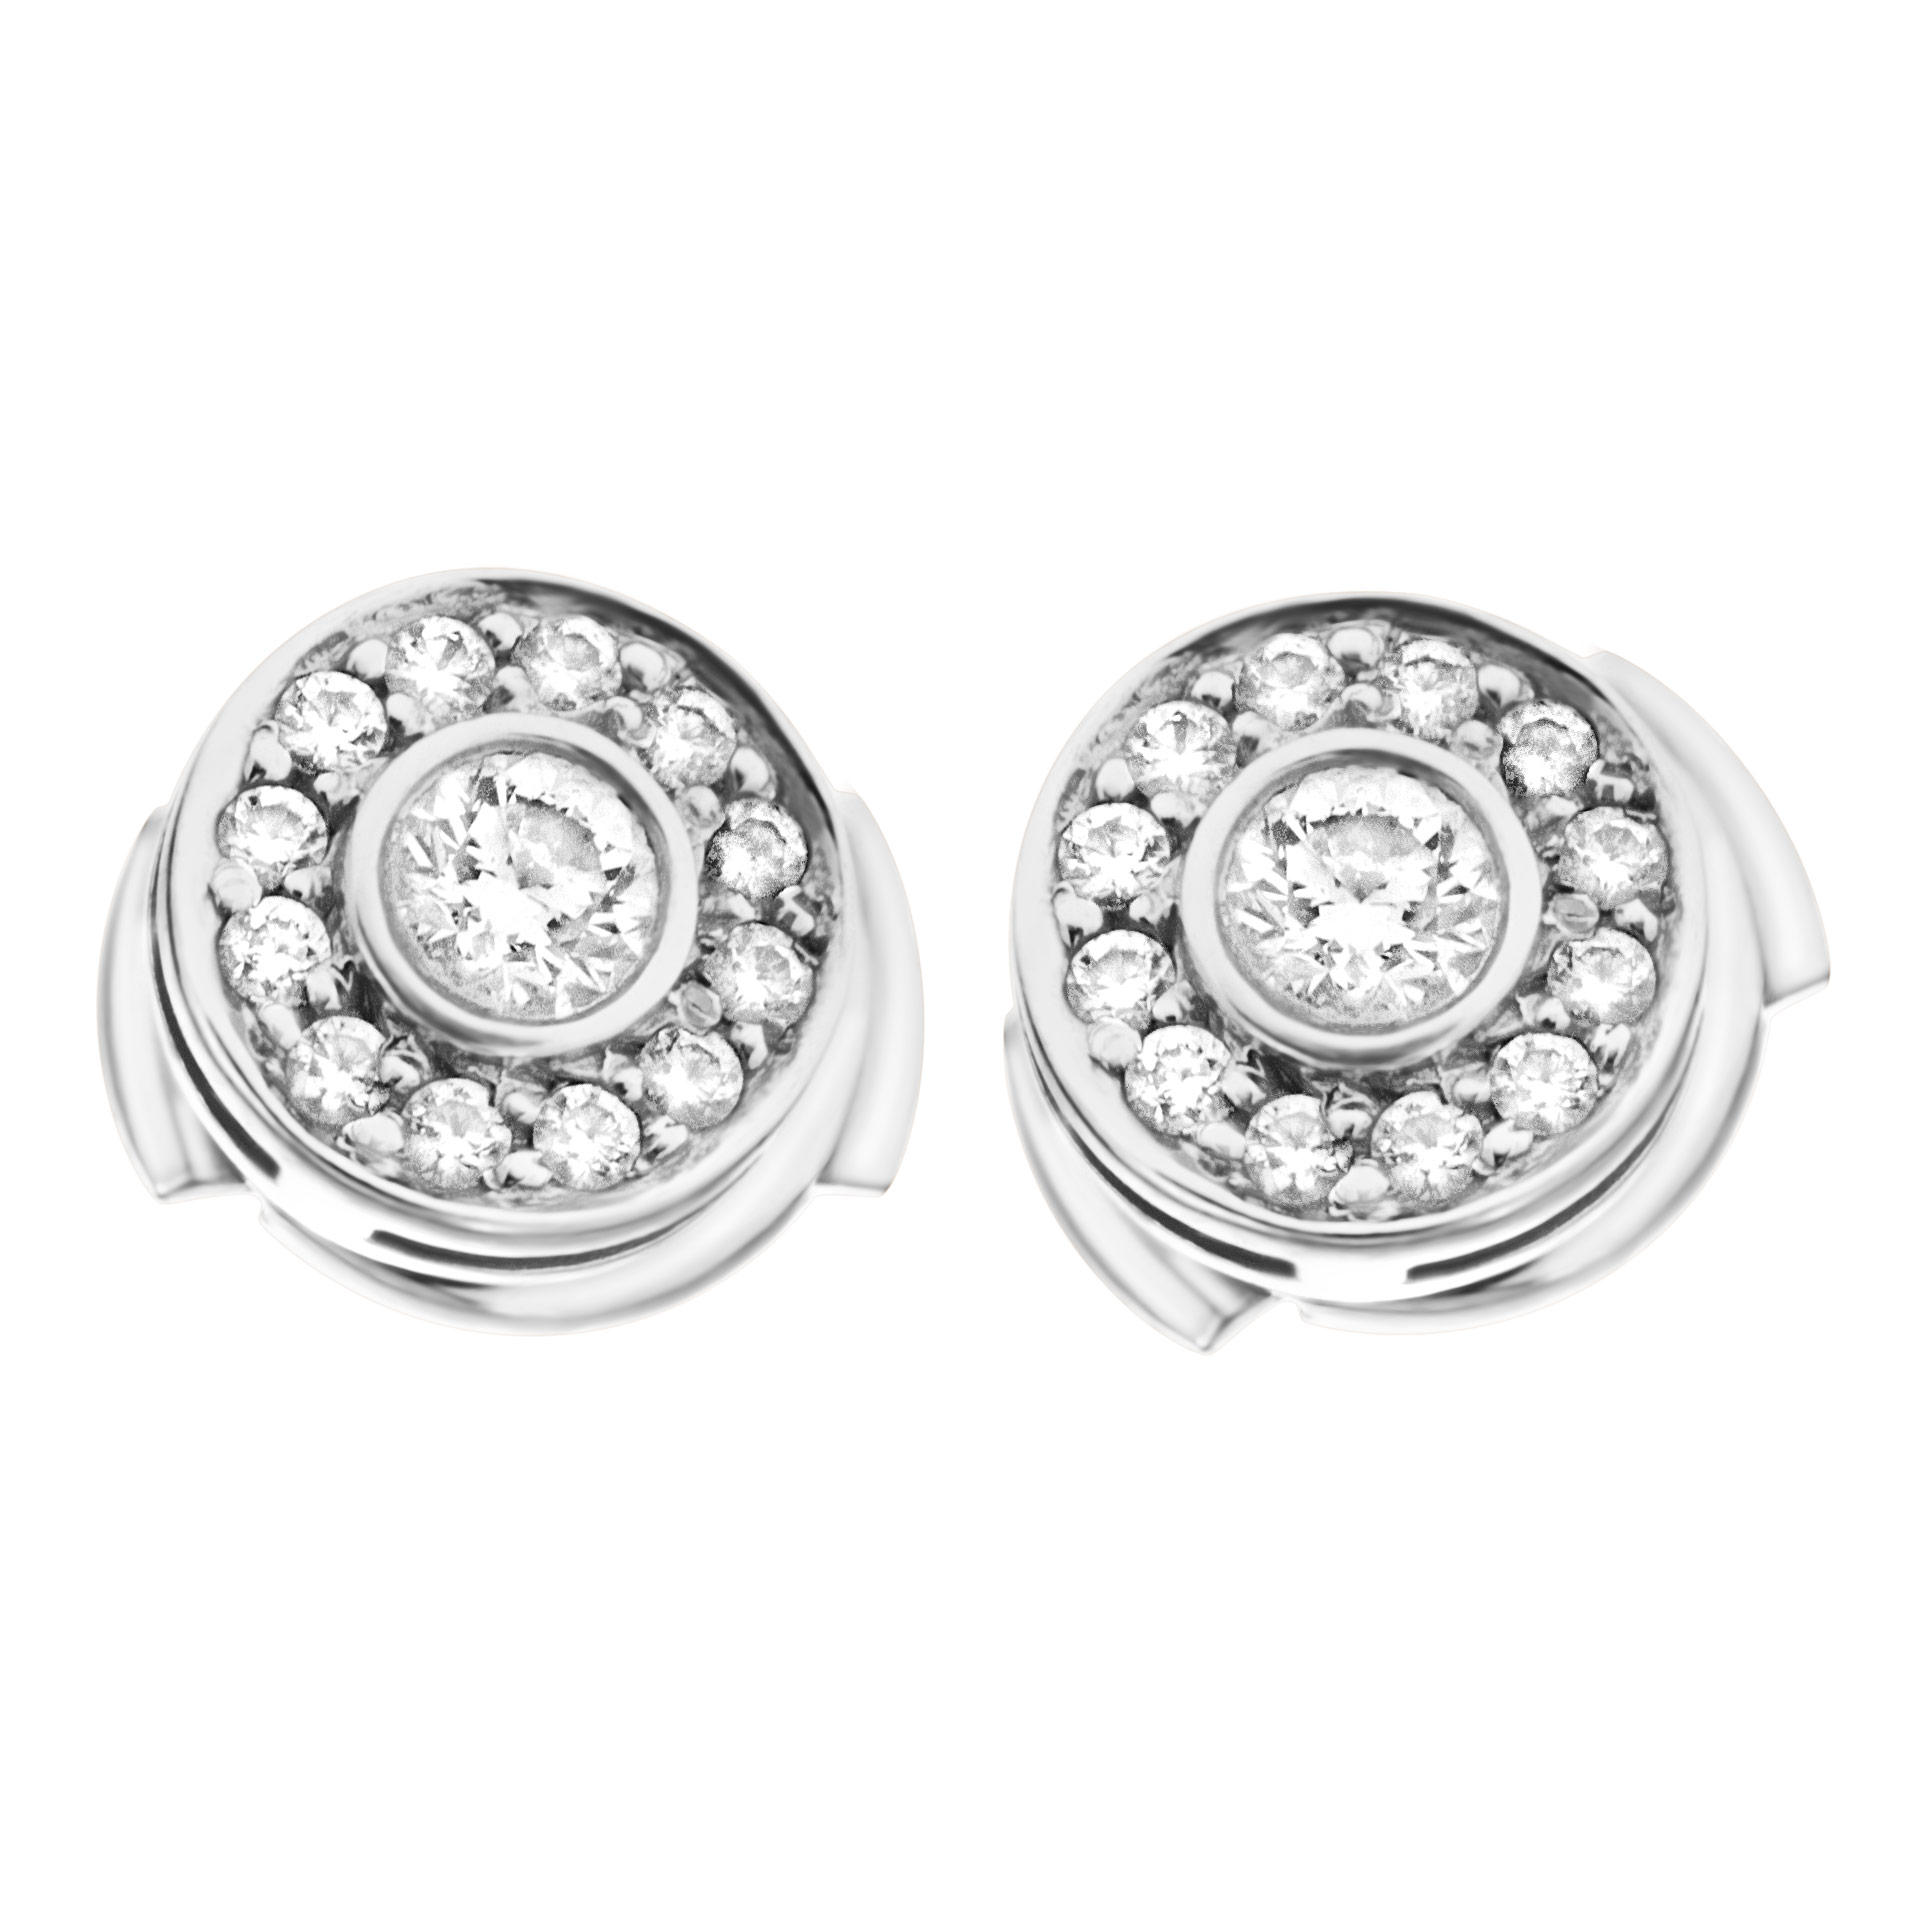 Tiffany & Co. Circlet collection mini diamond stud earrings in platinum